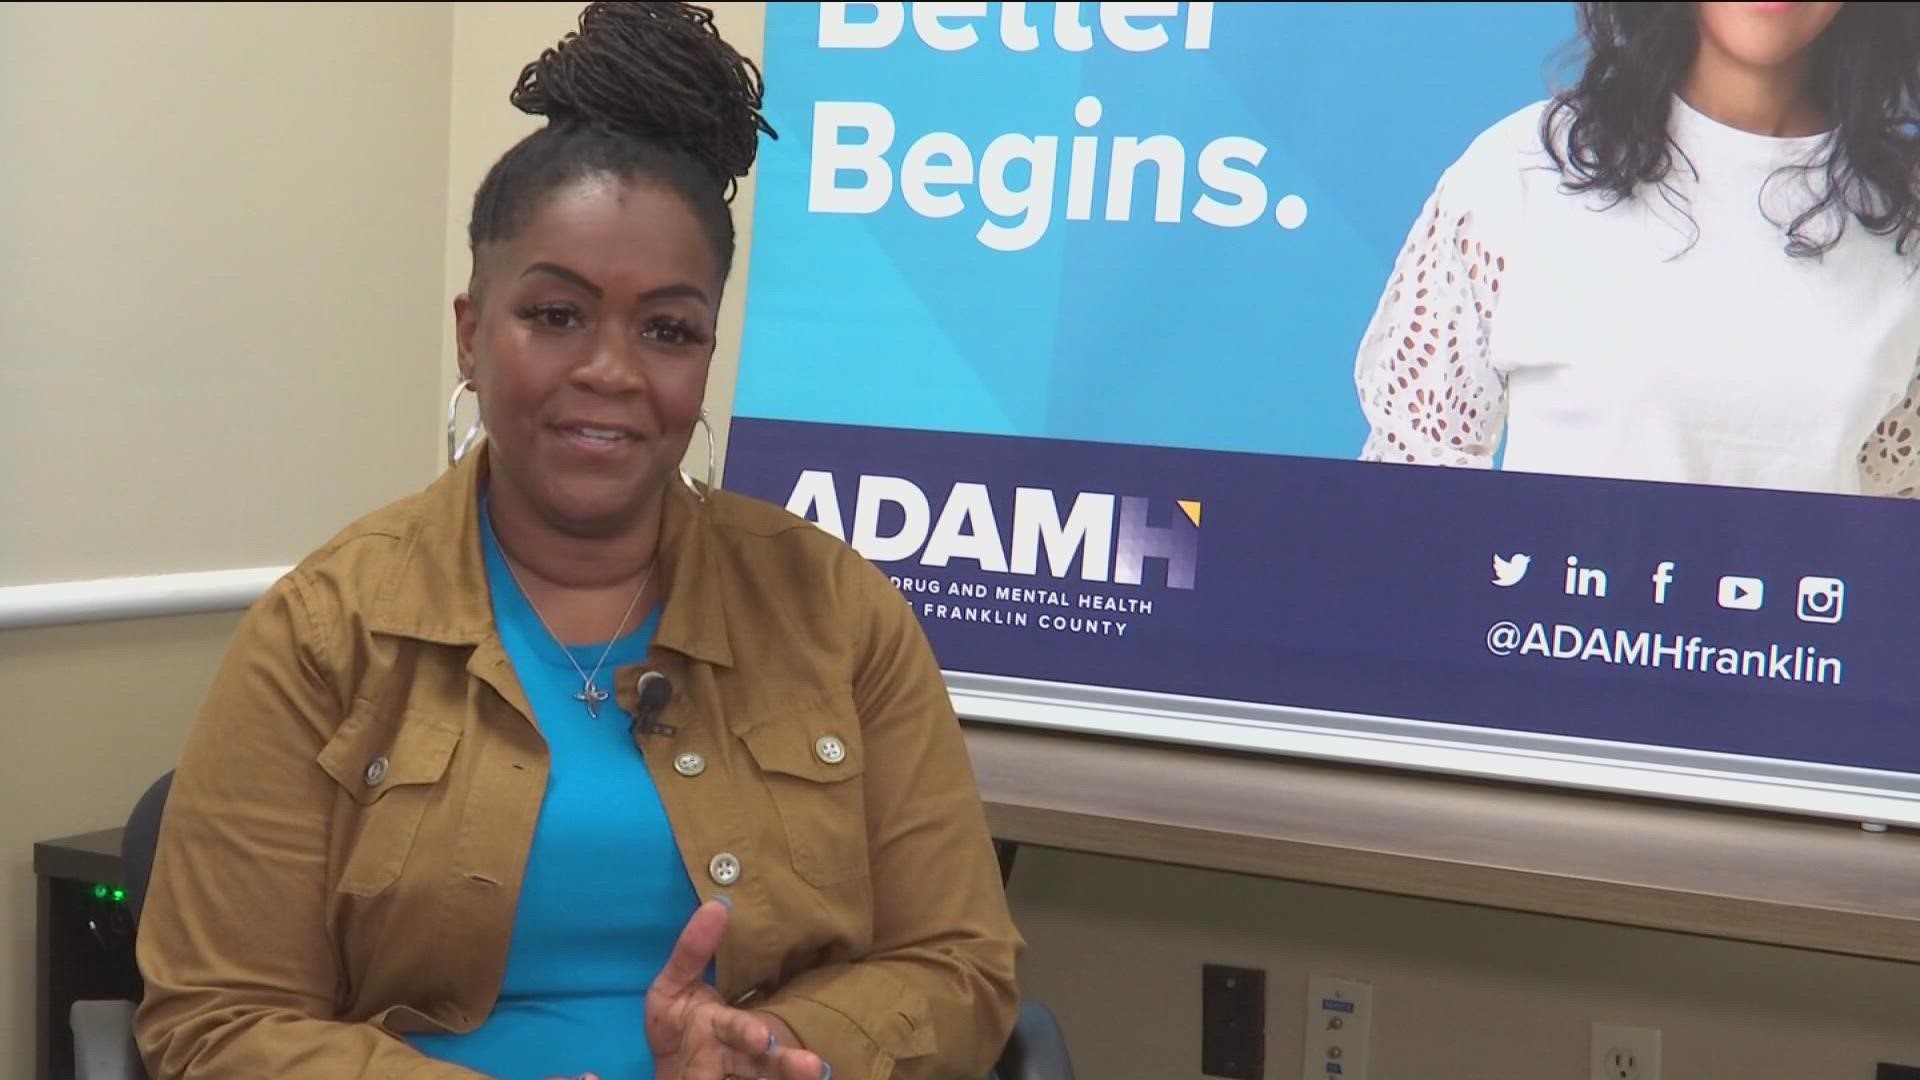 Kiona Dyches, from our sister station WBNS in Columbus, went to a mental health expert for answers on how to spot the warning signs and help work through issues.